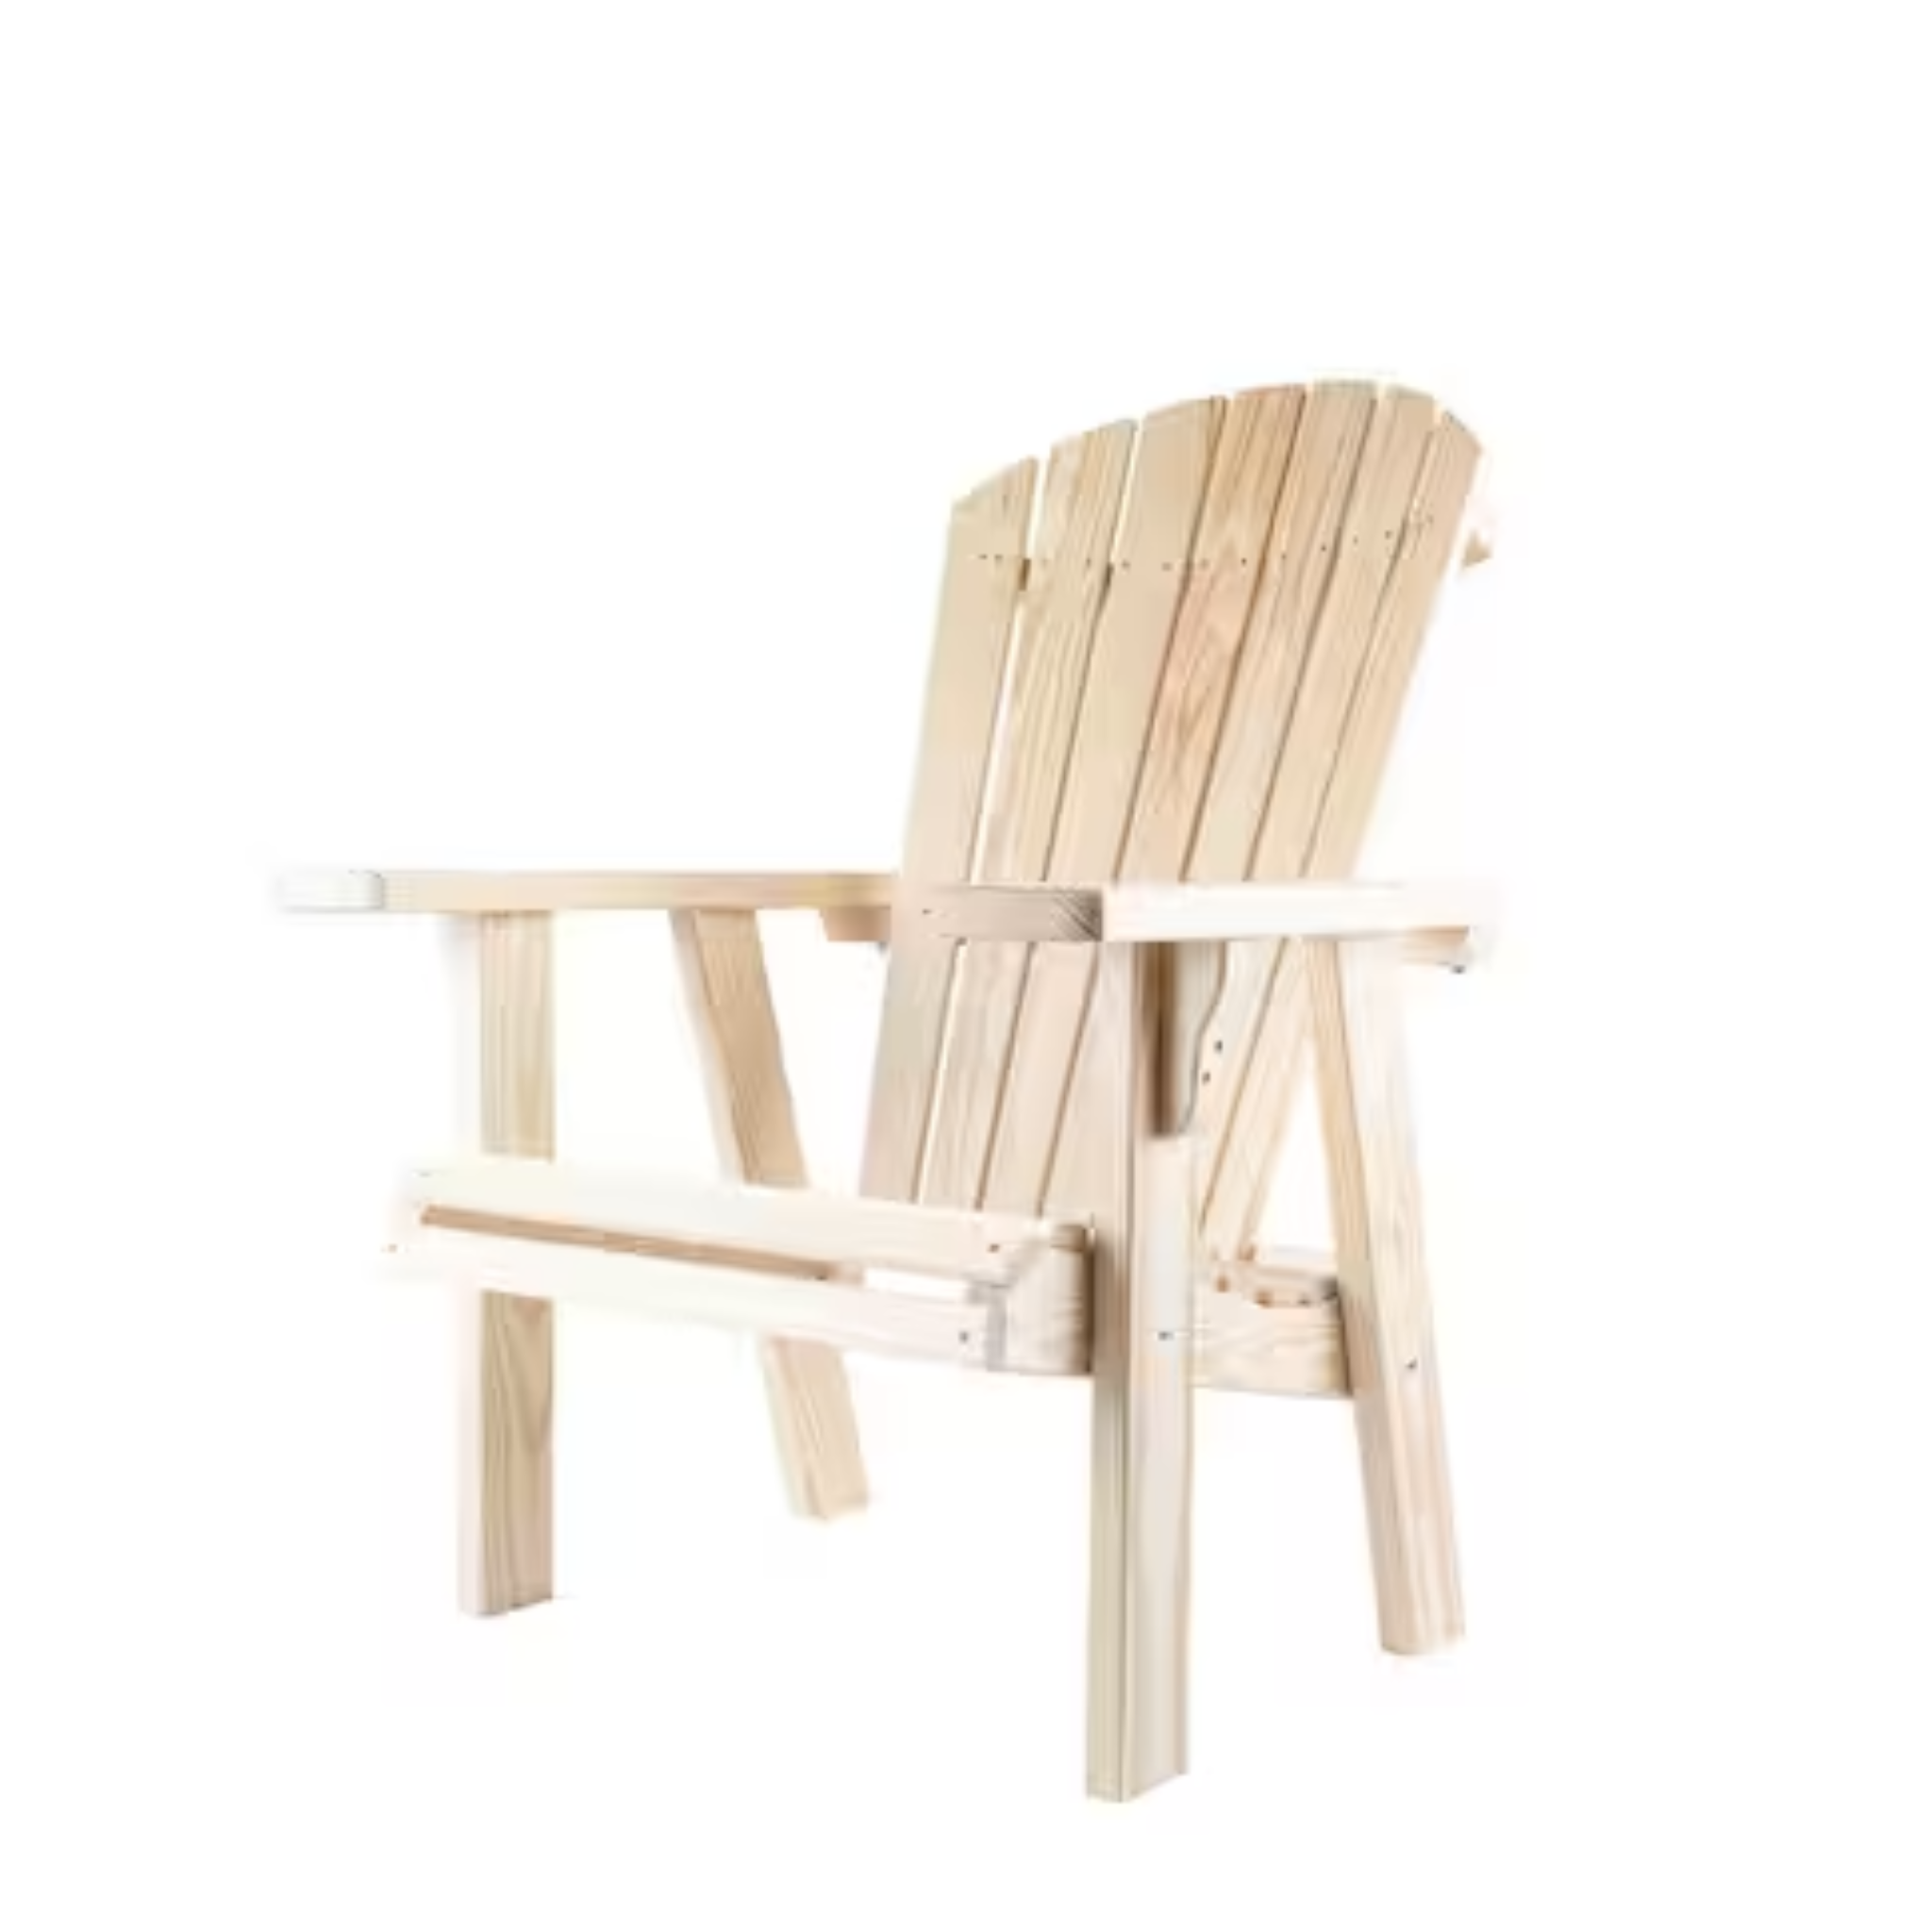 Palmetto Craft Capers Solid Pine Wood Adirondack Chair (Natural Wood)